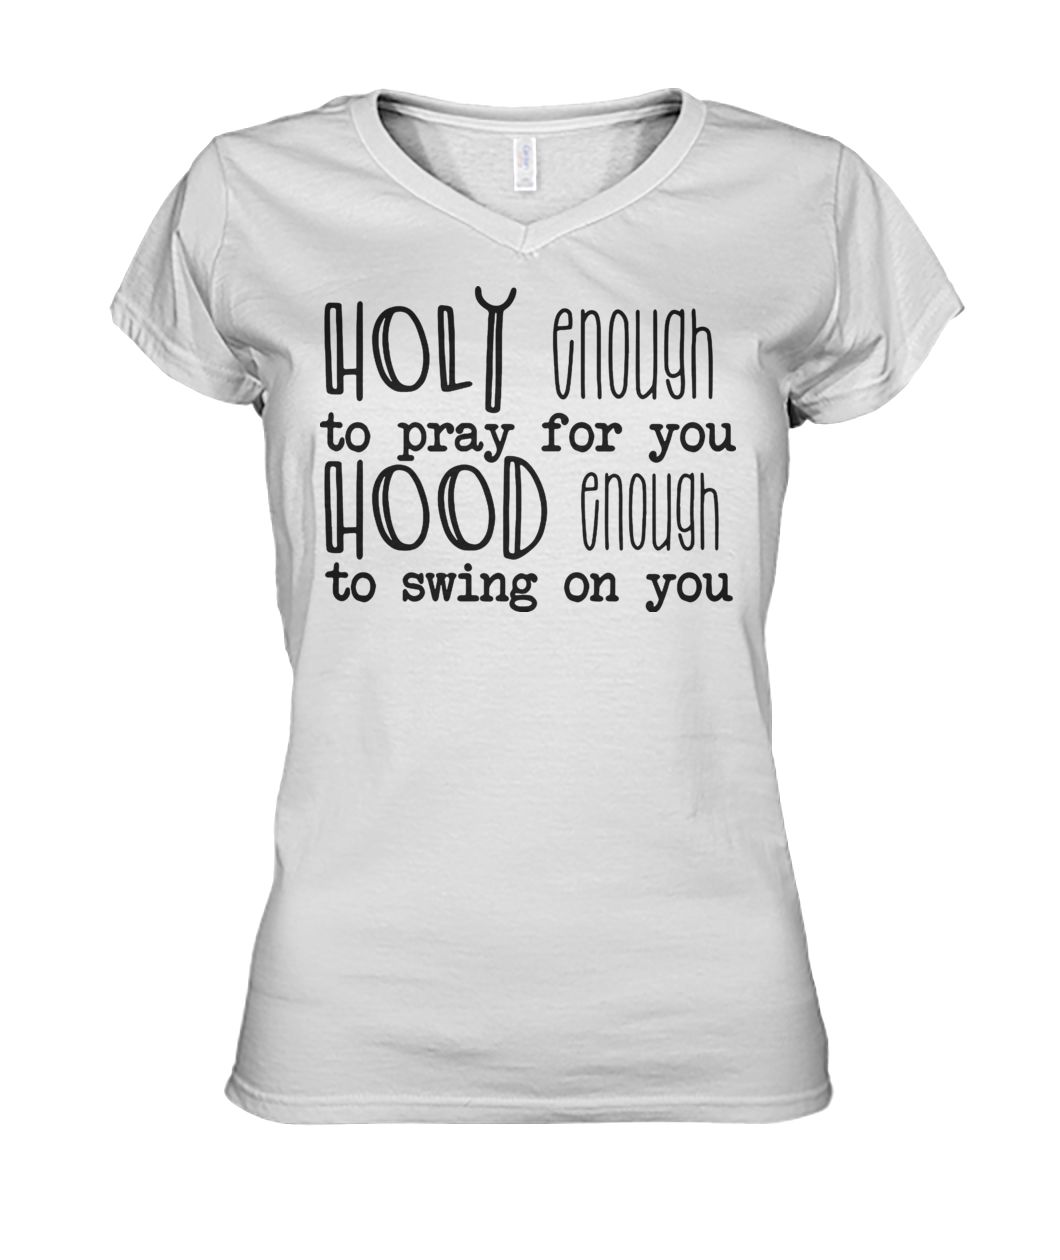 Holy enough to pray for you hood enough to swing on you women's v-neck